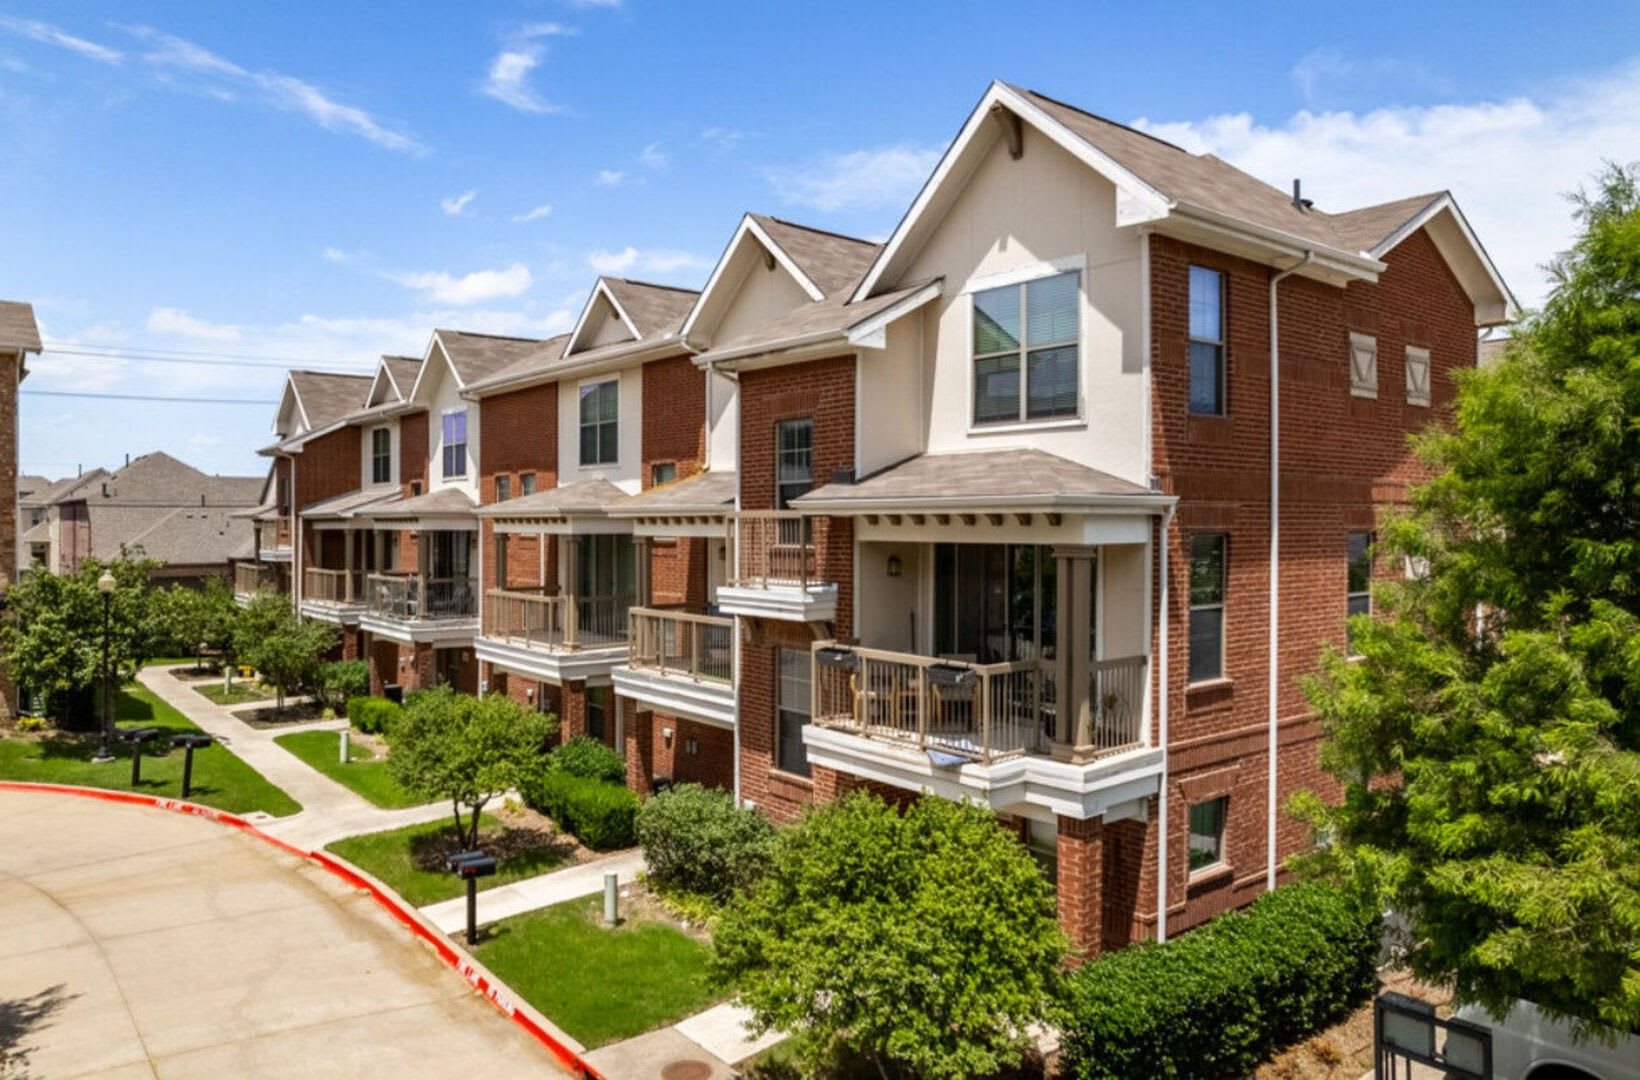 Accessibility Statement at Parkside Towns in Richardson, Texas